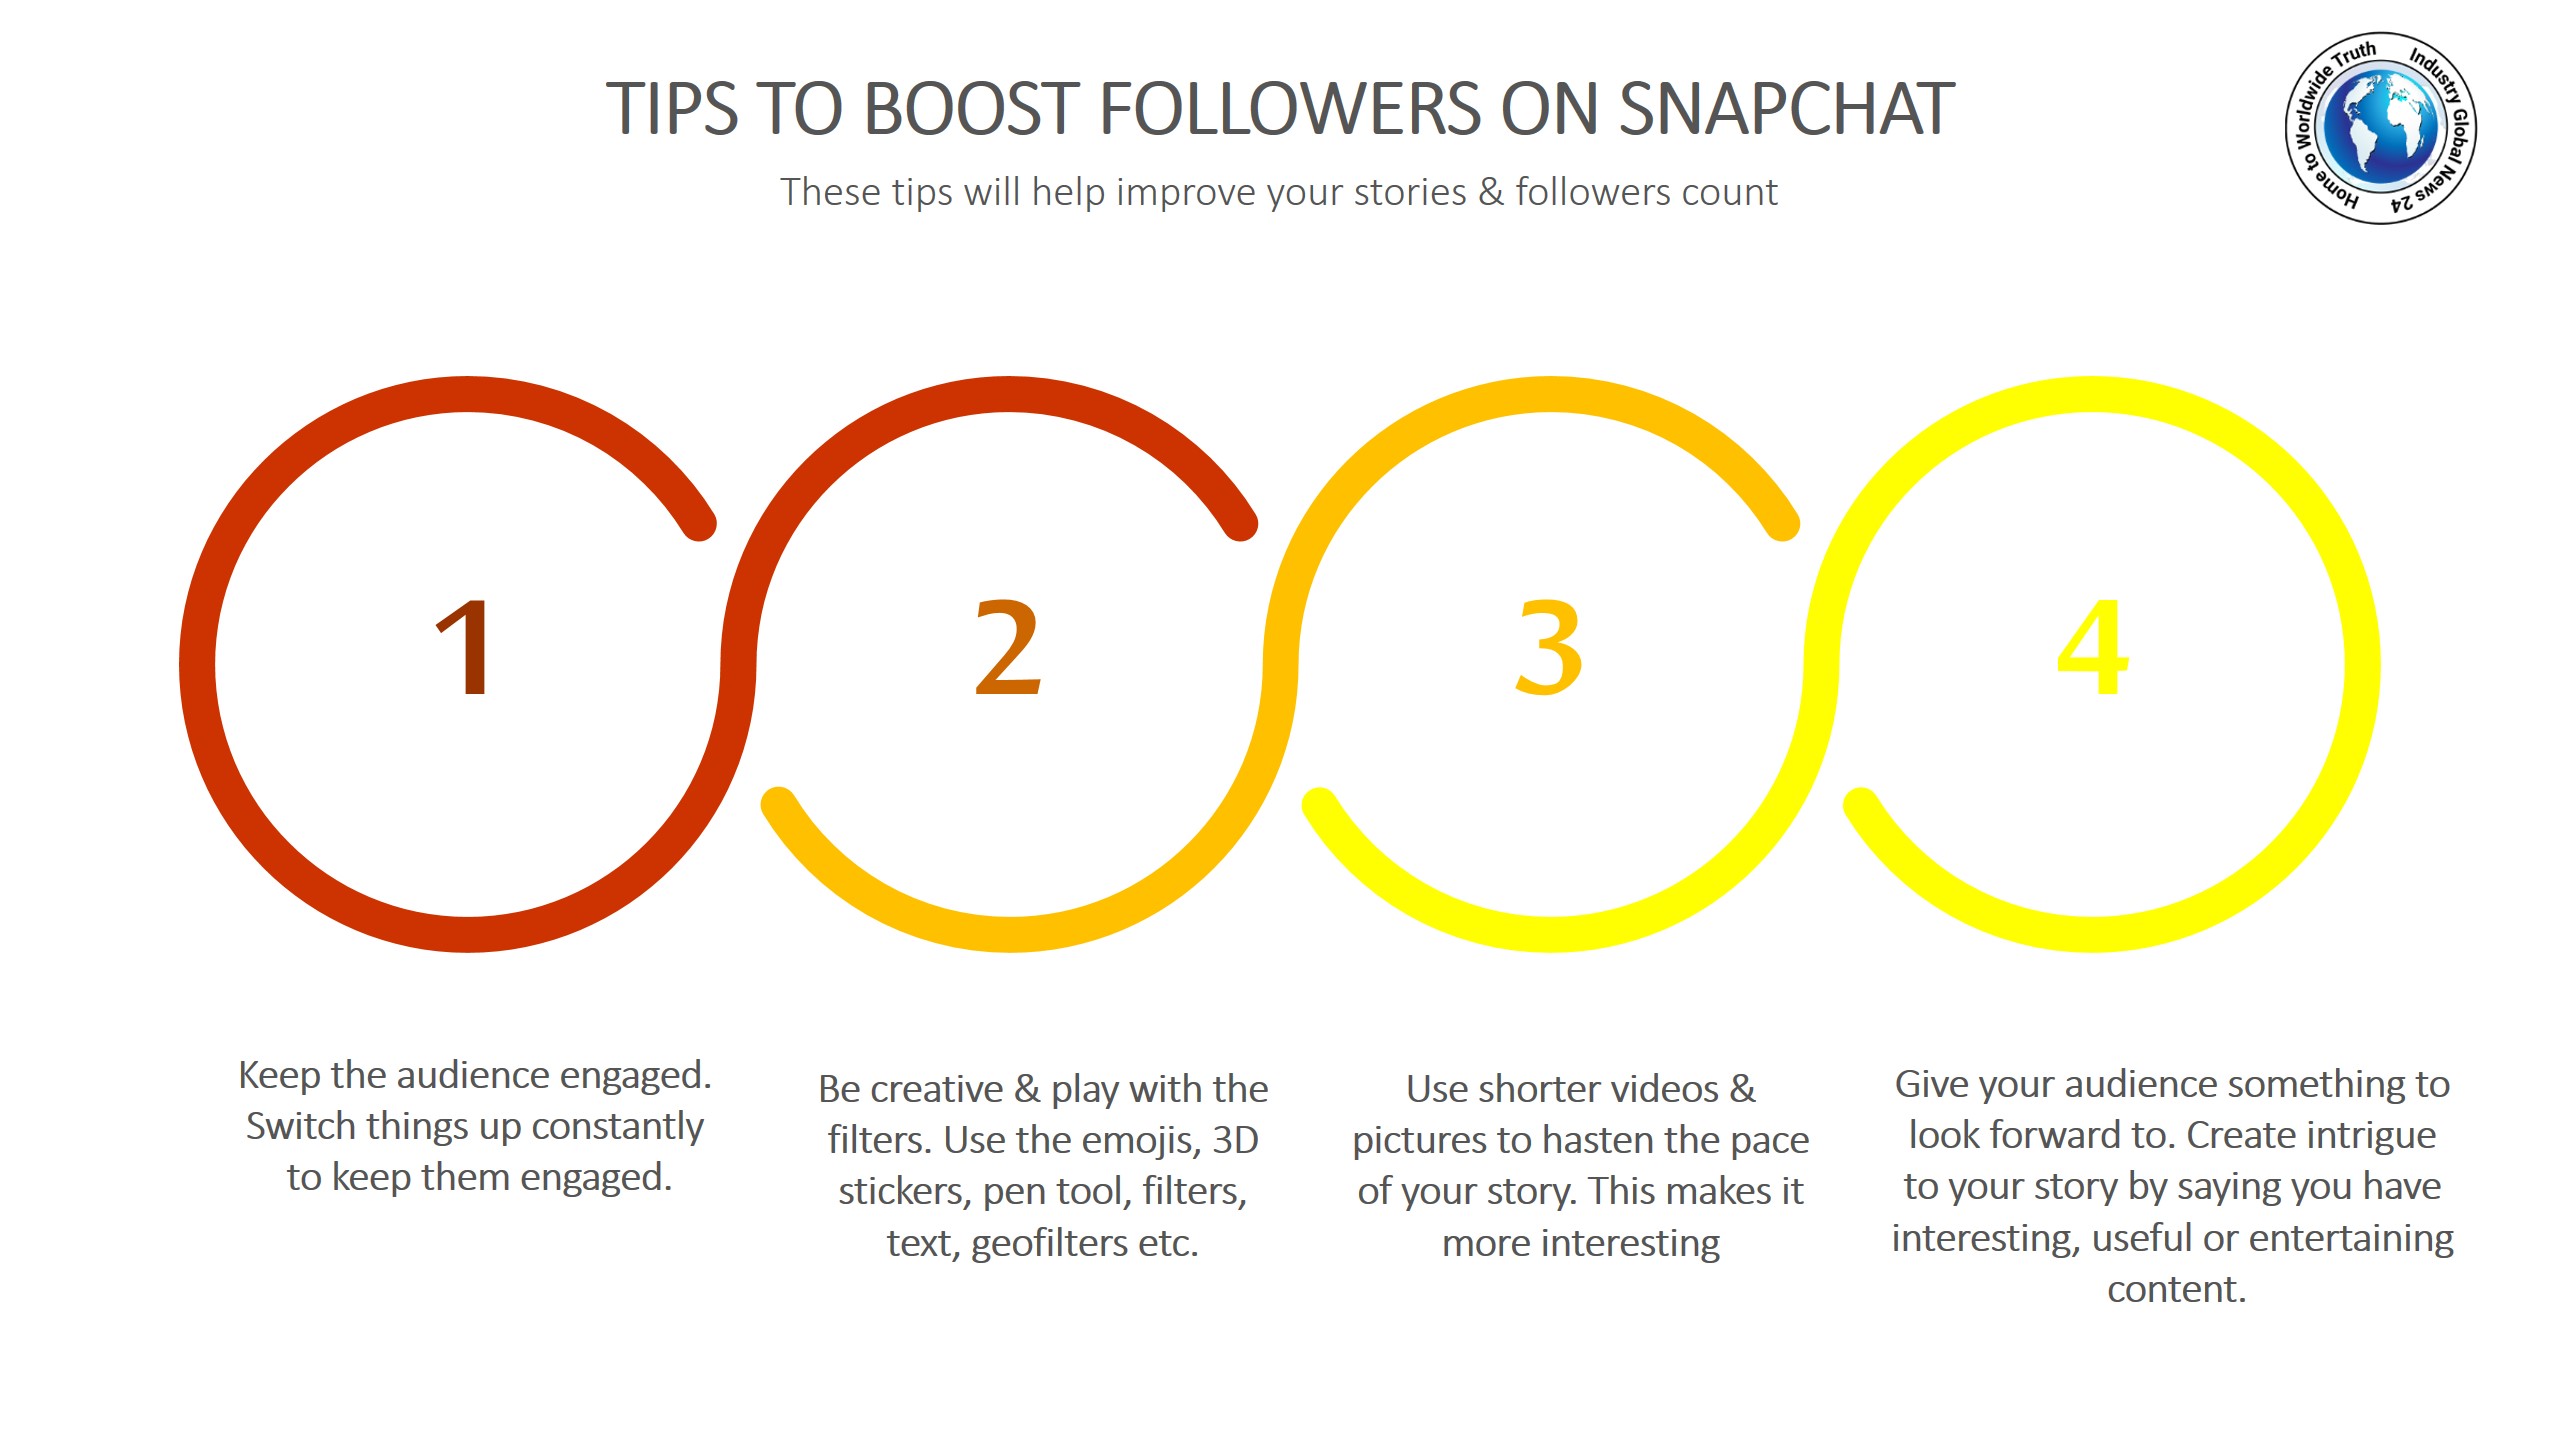 Tips to boost followers on Snapchat